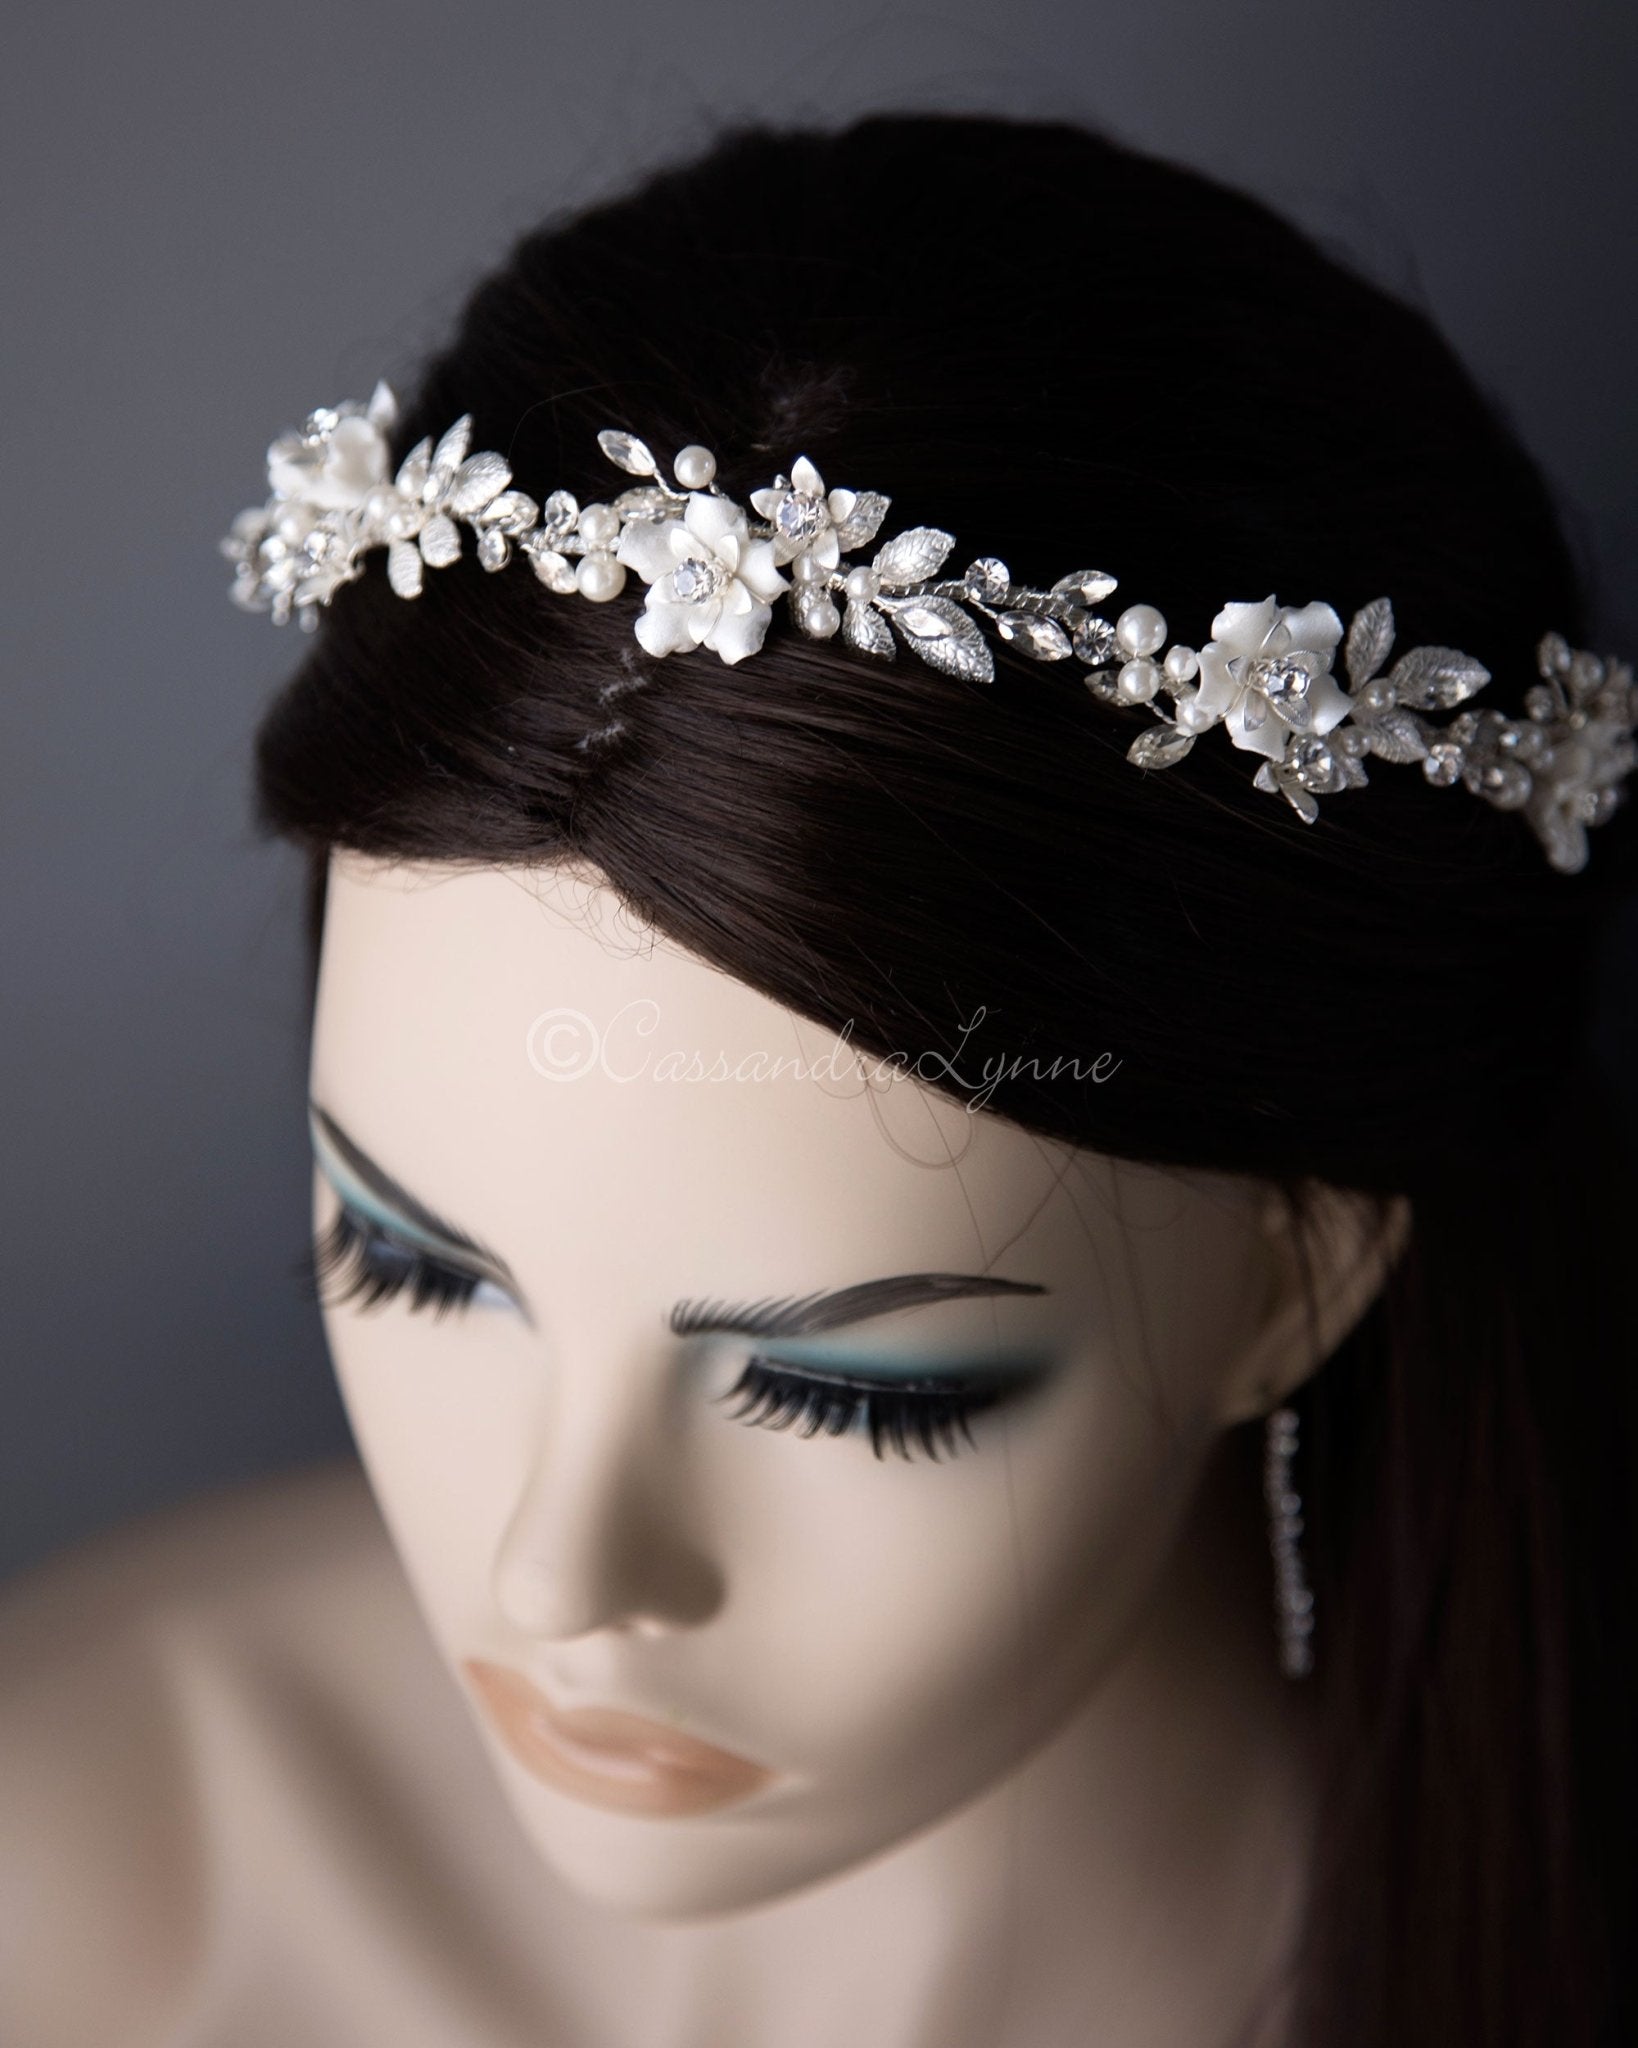 Romantic Wedding Headband with Hand Painted Porcelain Flowers